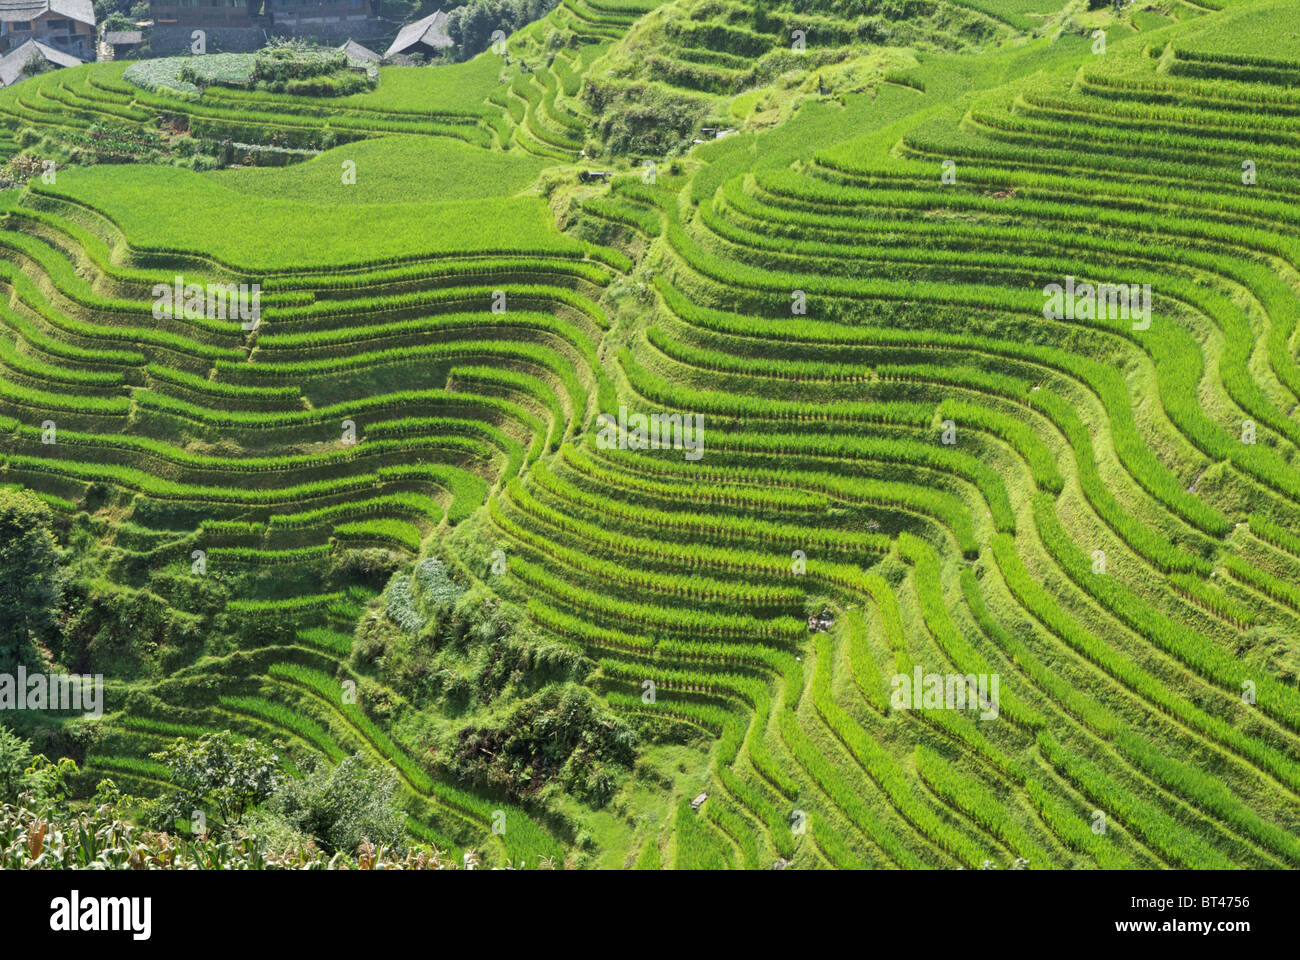 LongJi rice terraces (Guangxi province, China) in late summer. The lines around the mountain forms almost an abstract pattern Stock Photo